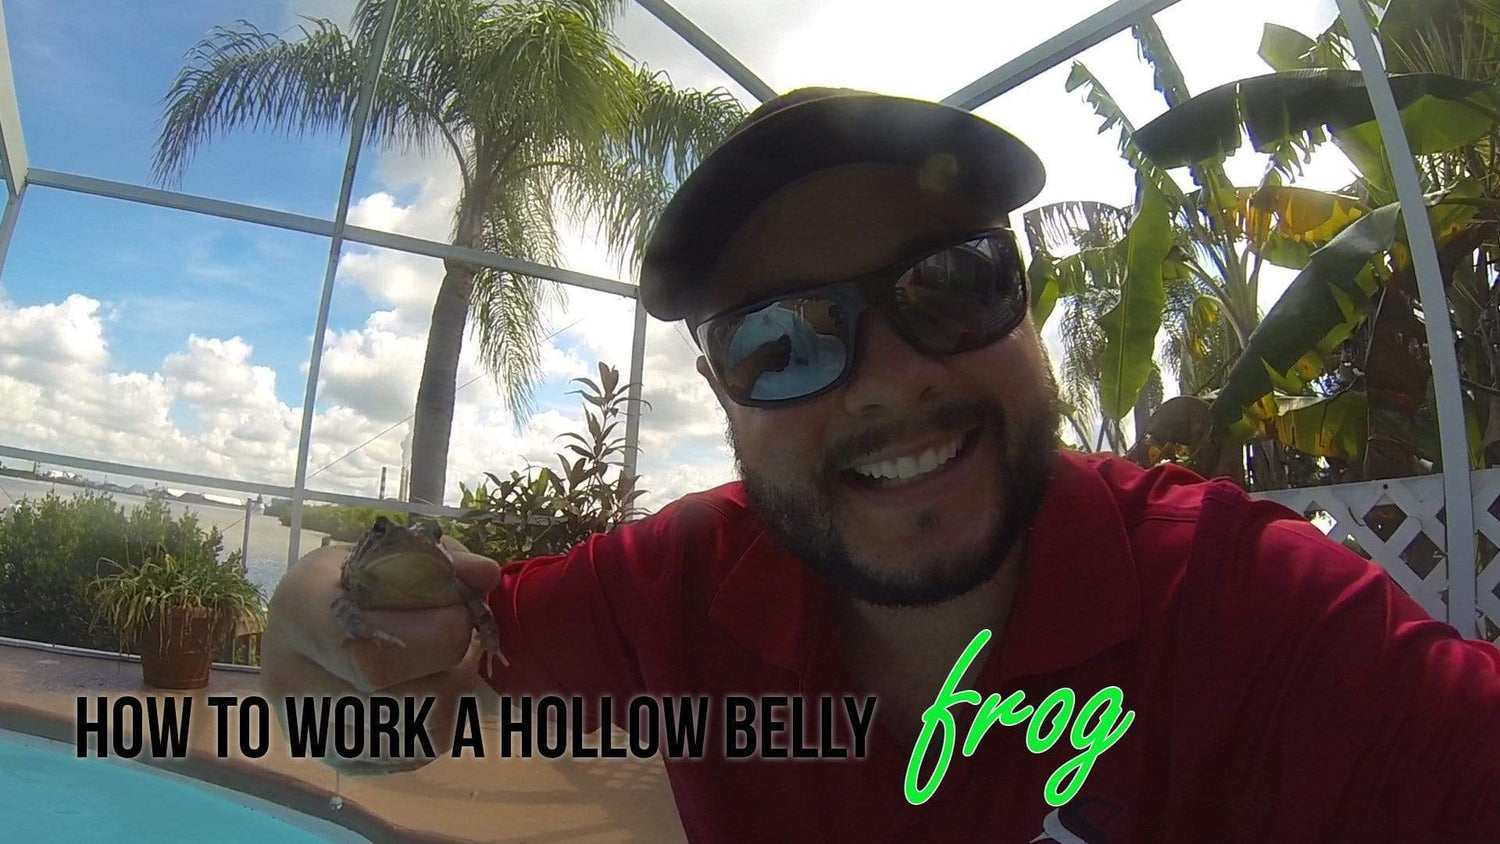 How to Work a Hollow Belly Frog - Video Demonstration